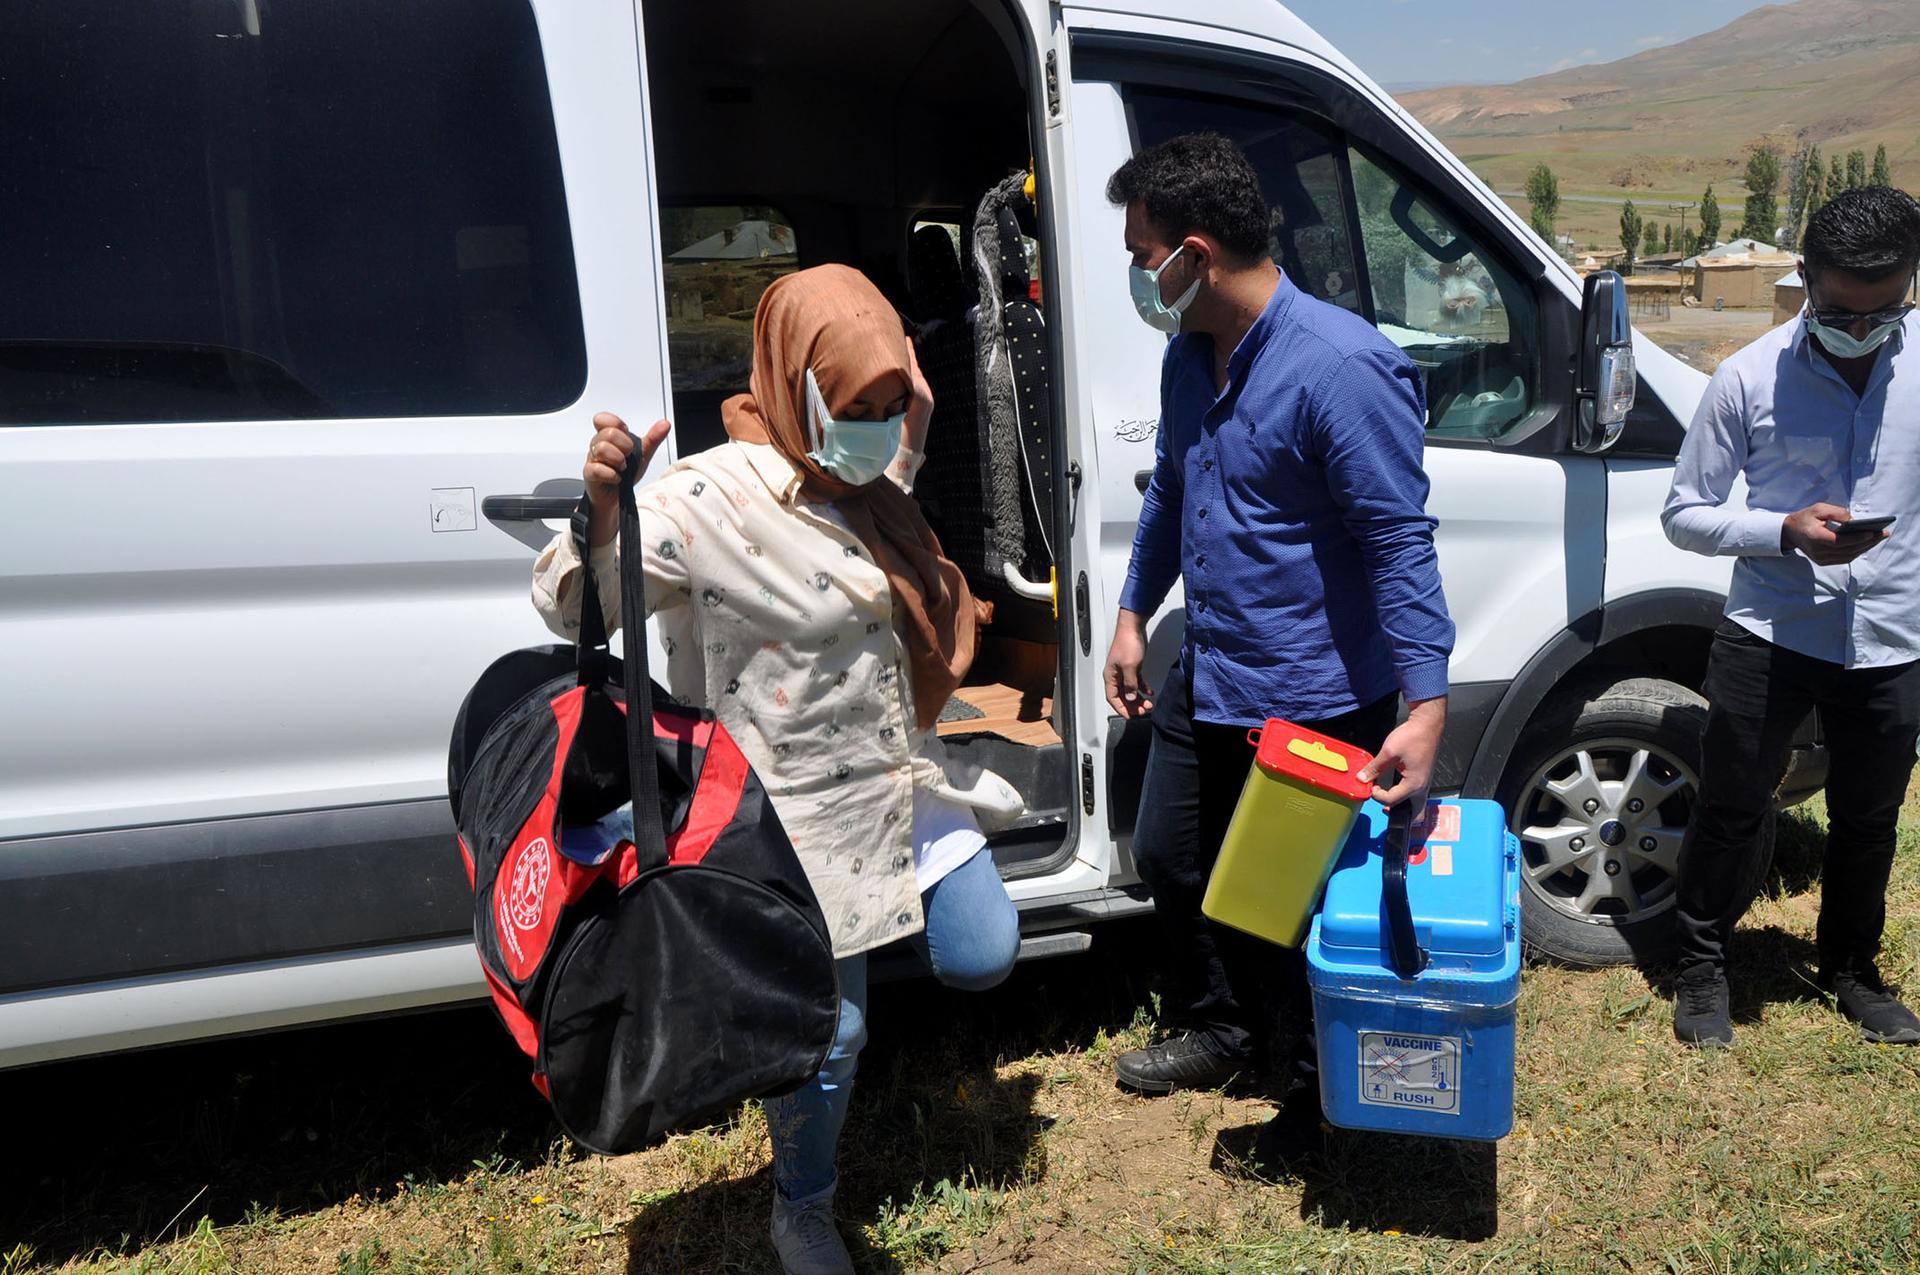 Health workers unload equipment to give out COVID vaccines in Ömerova, a village in Turkey’s eastern Kurdish region.